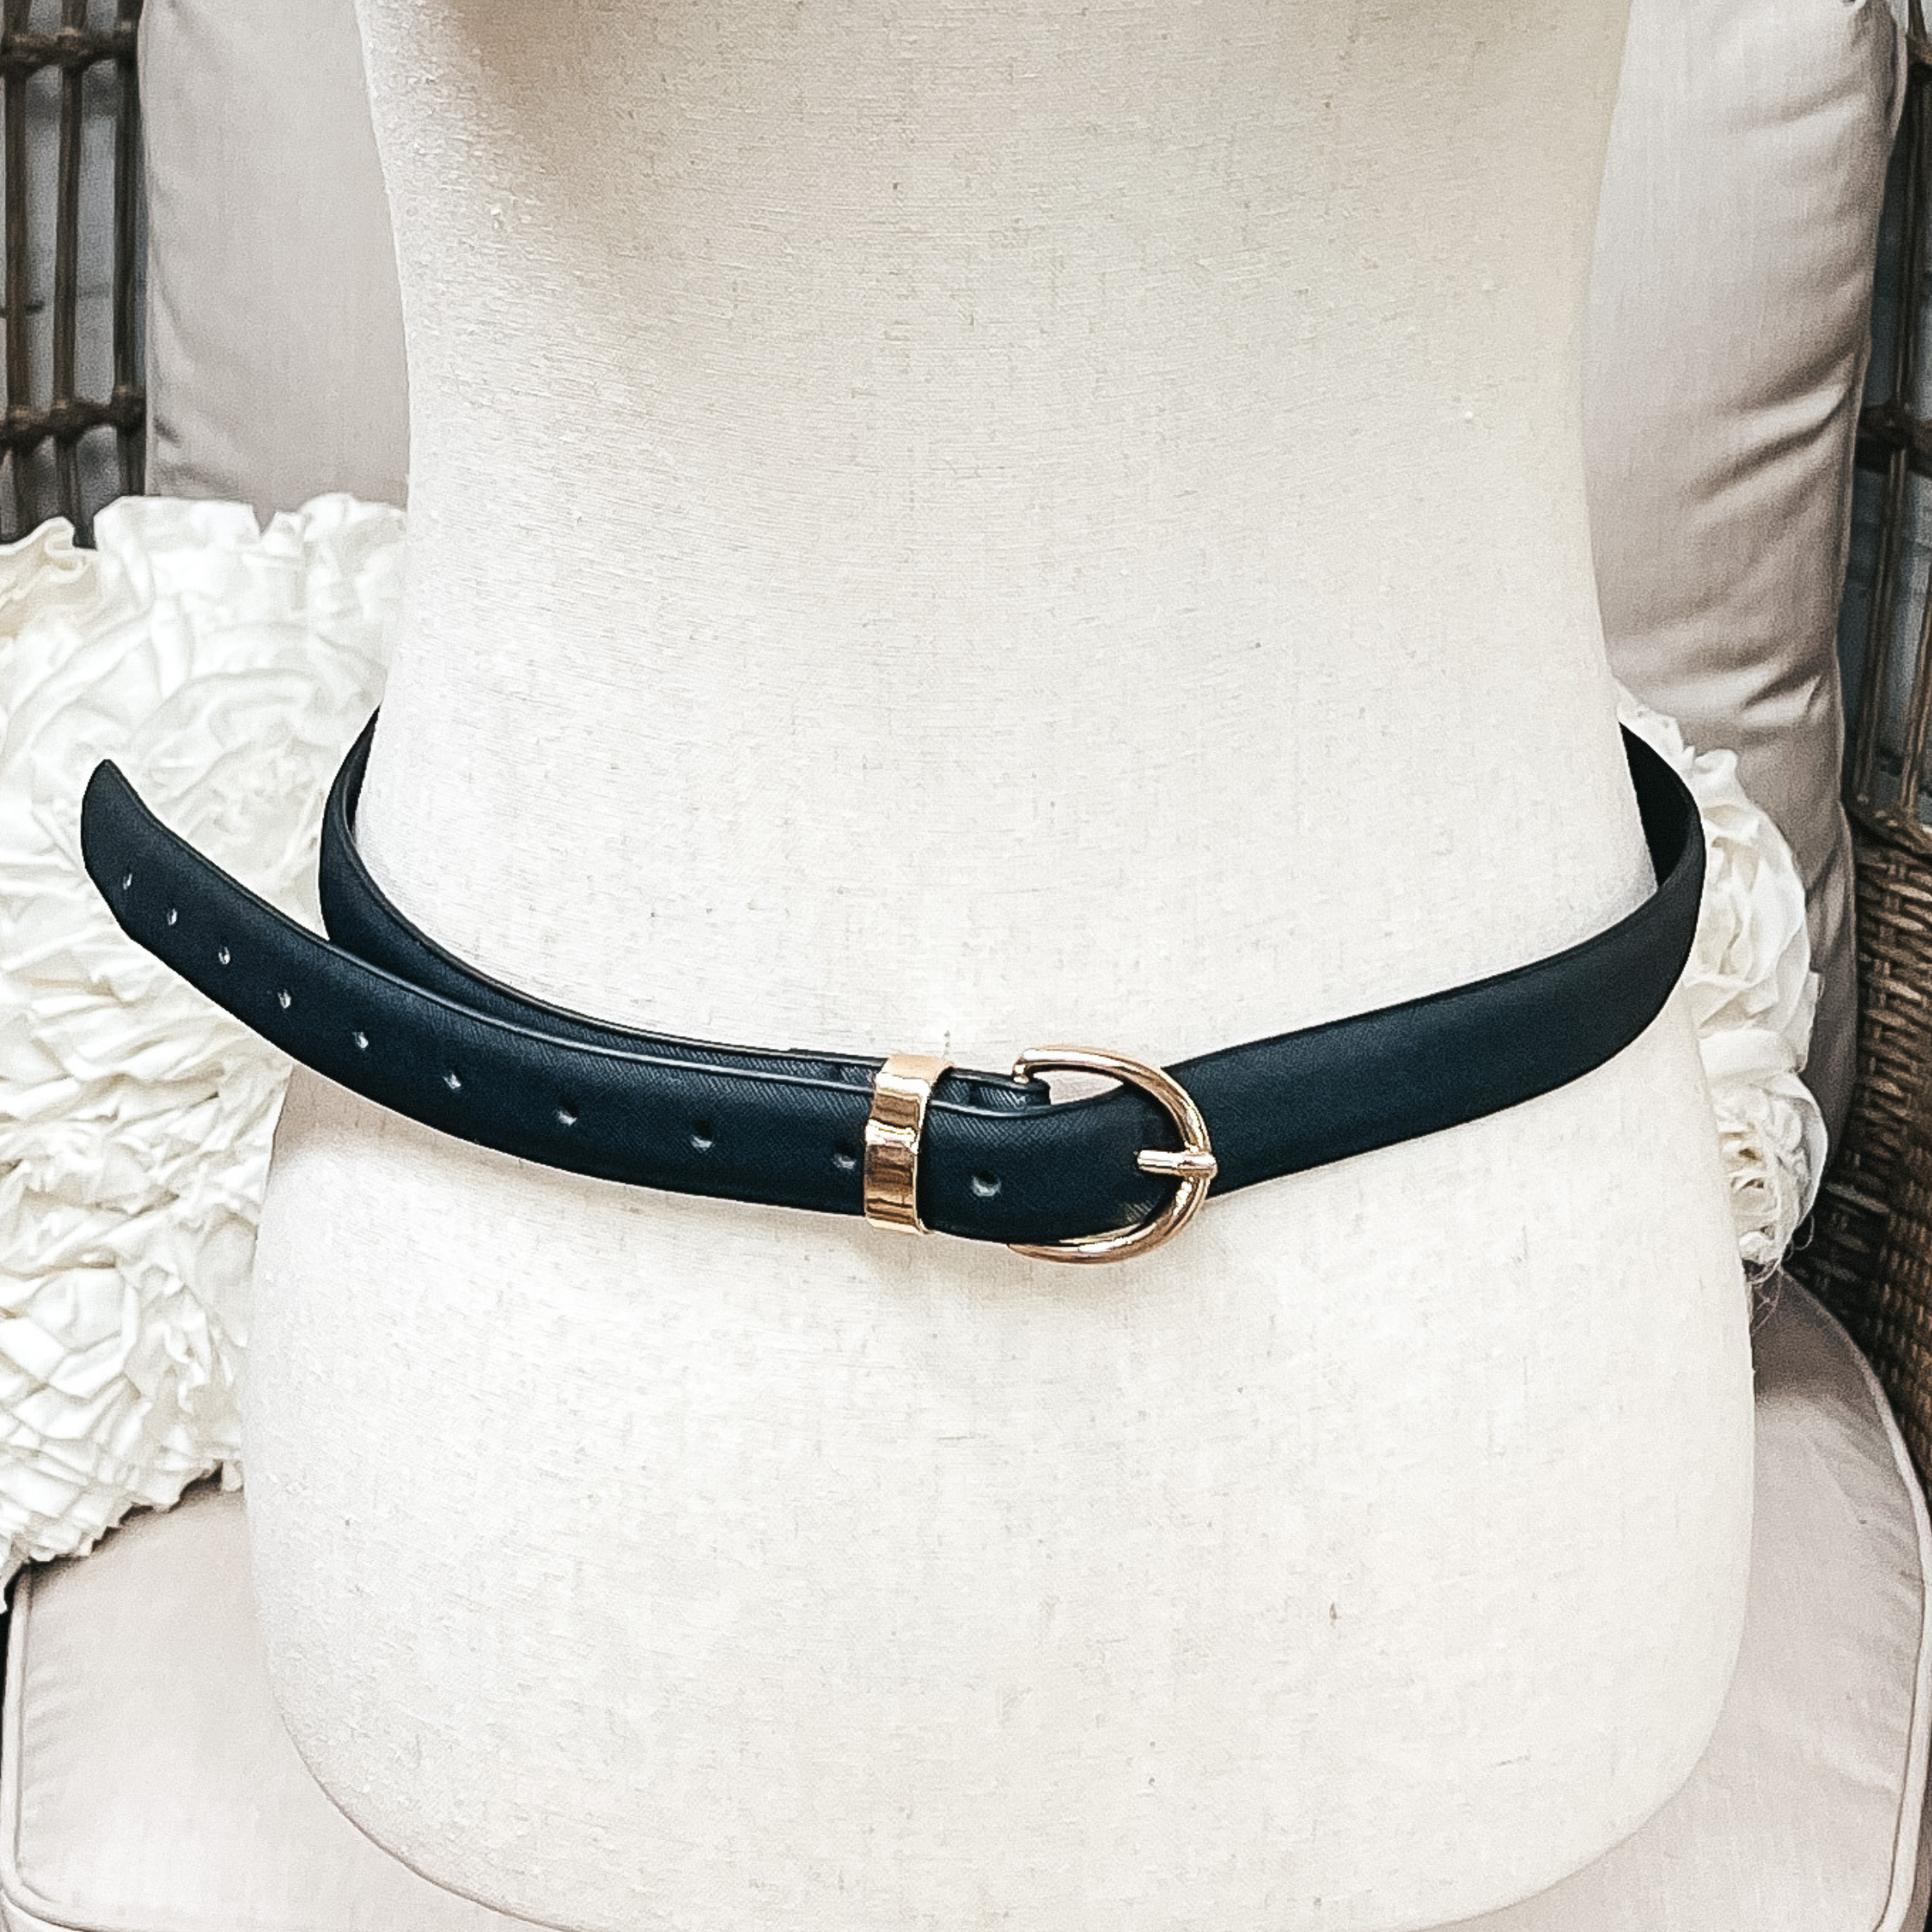 There is one skinny belt in black with a small oval buckle in gold. The belt  is placed on an ivory mannequin.